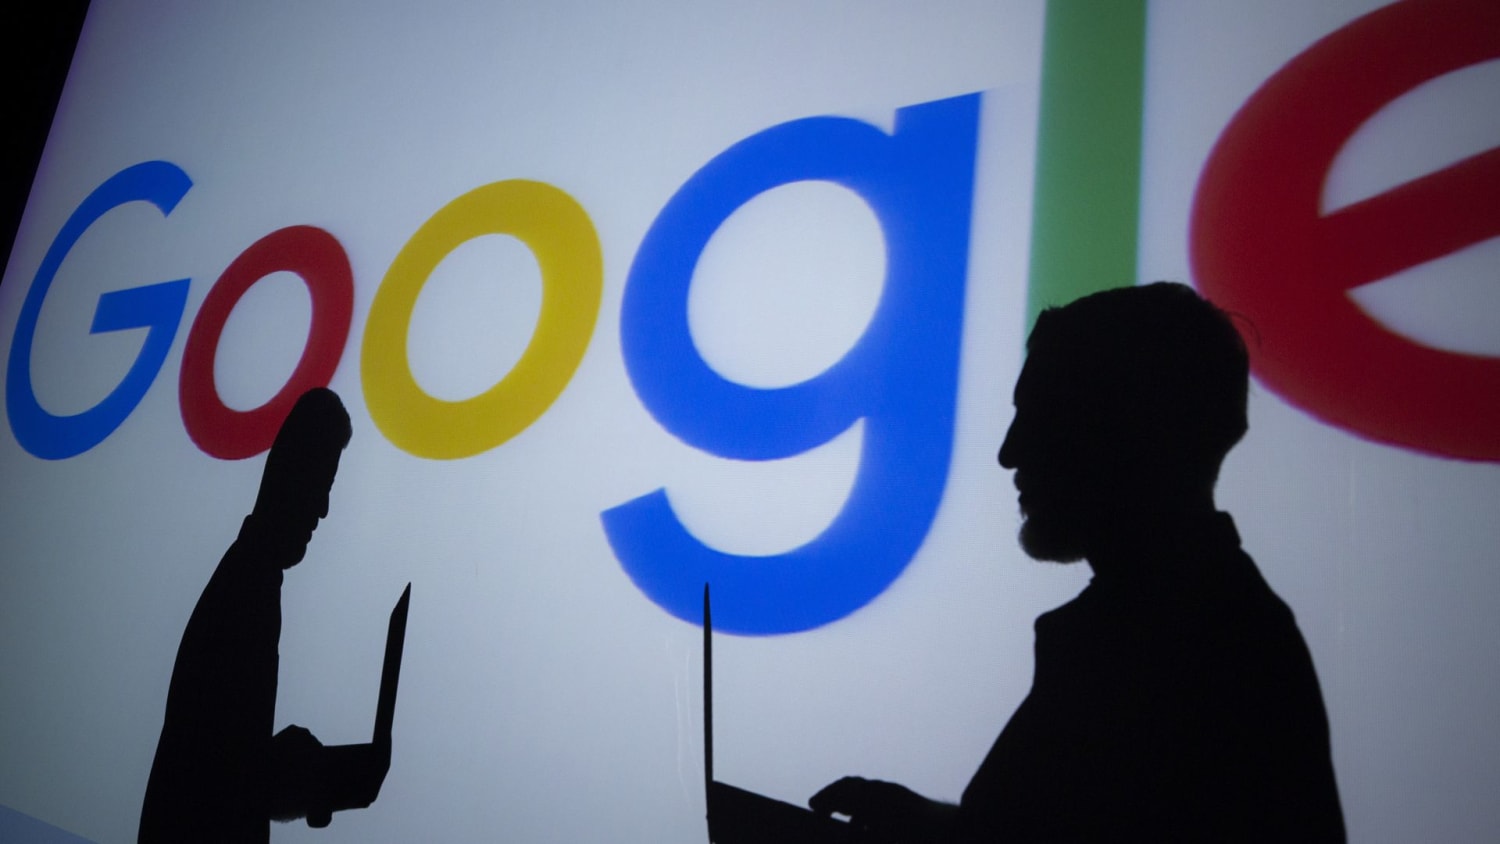 Exclusive: Google partners to fund new local media sites